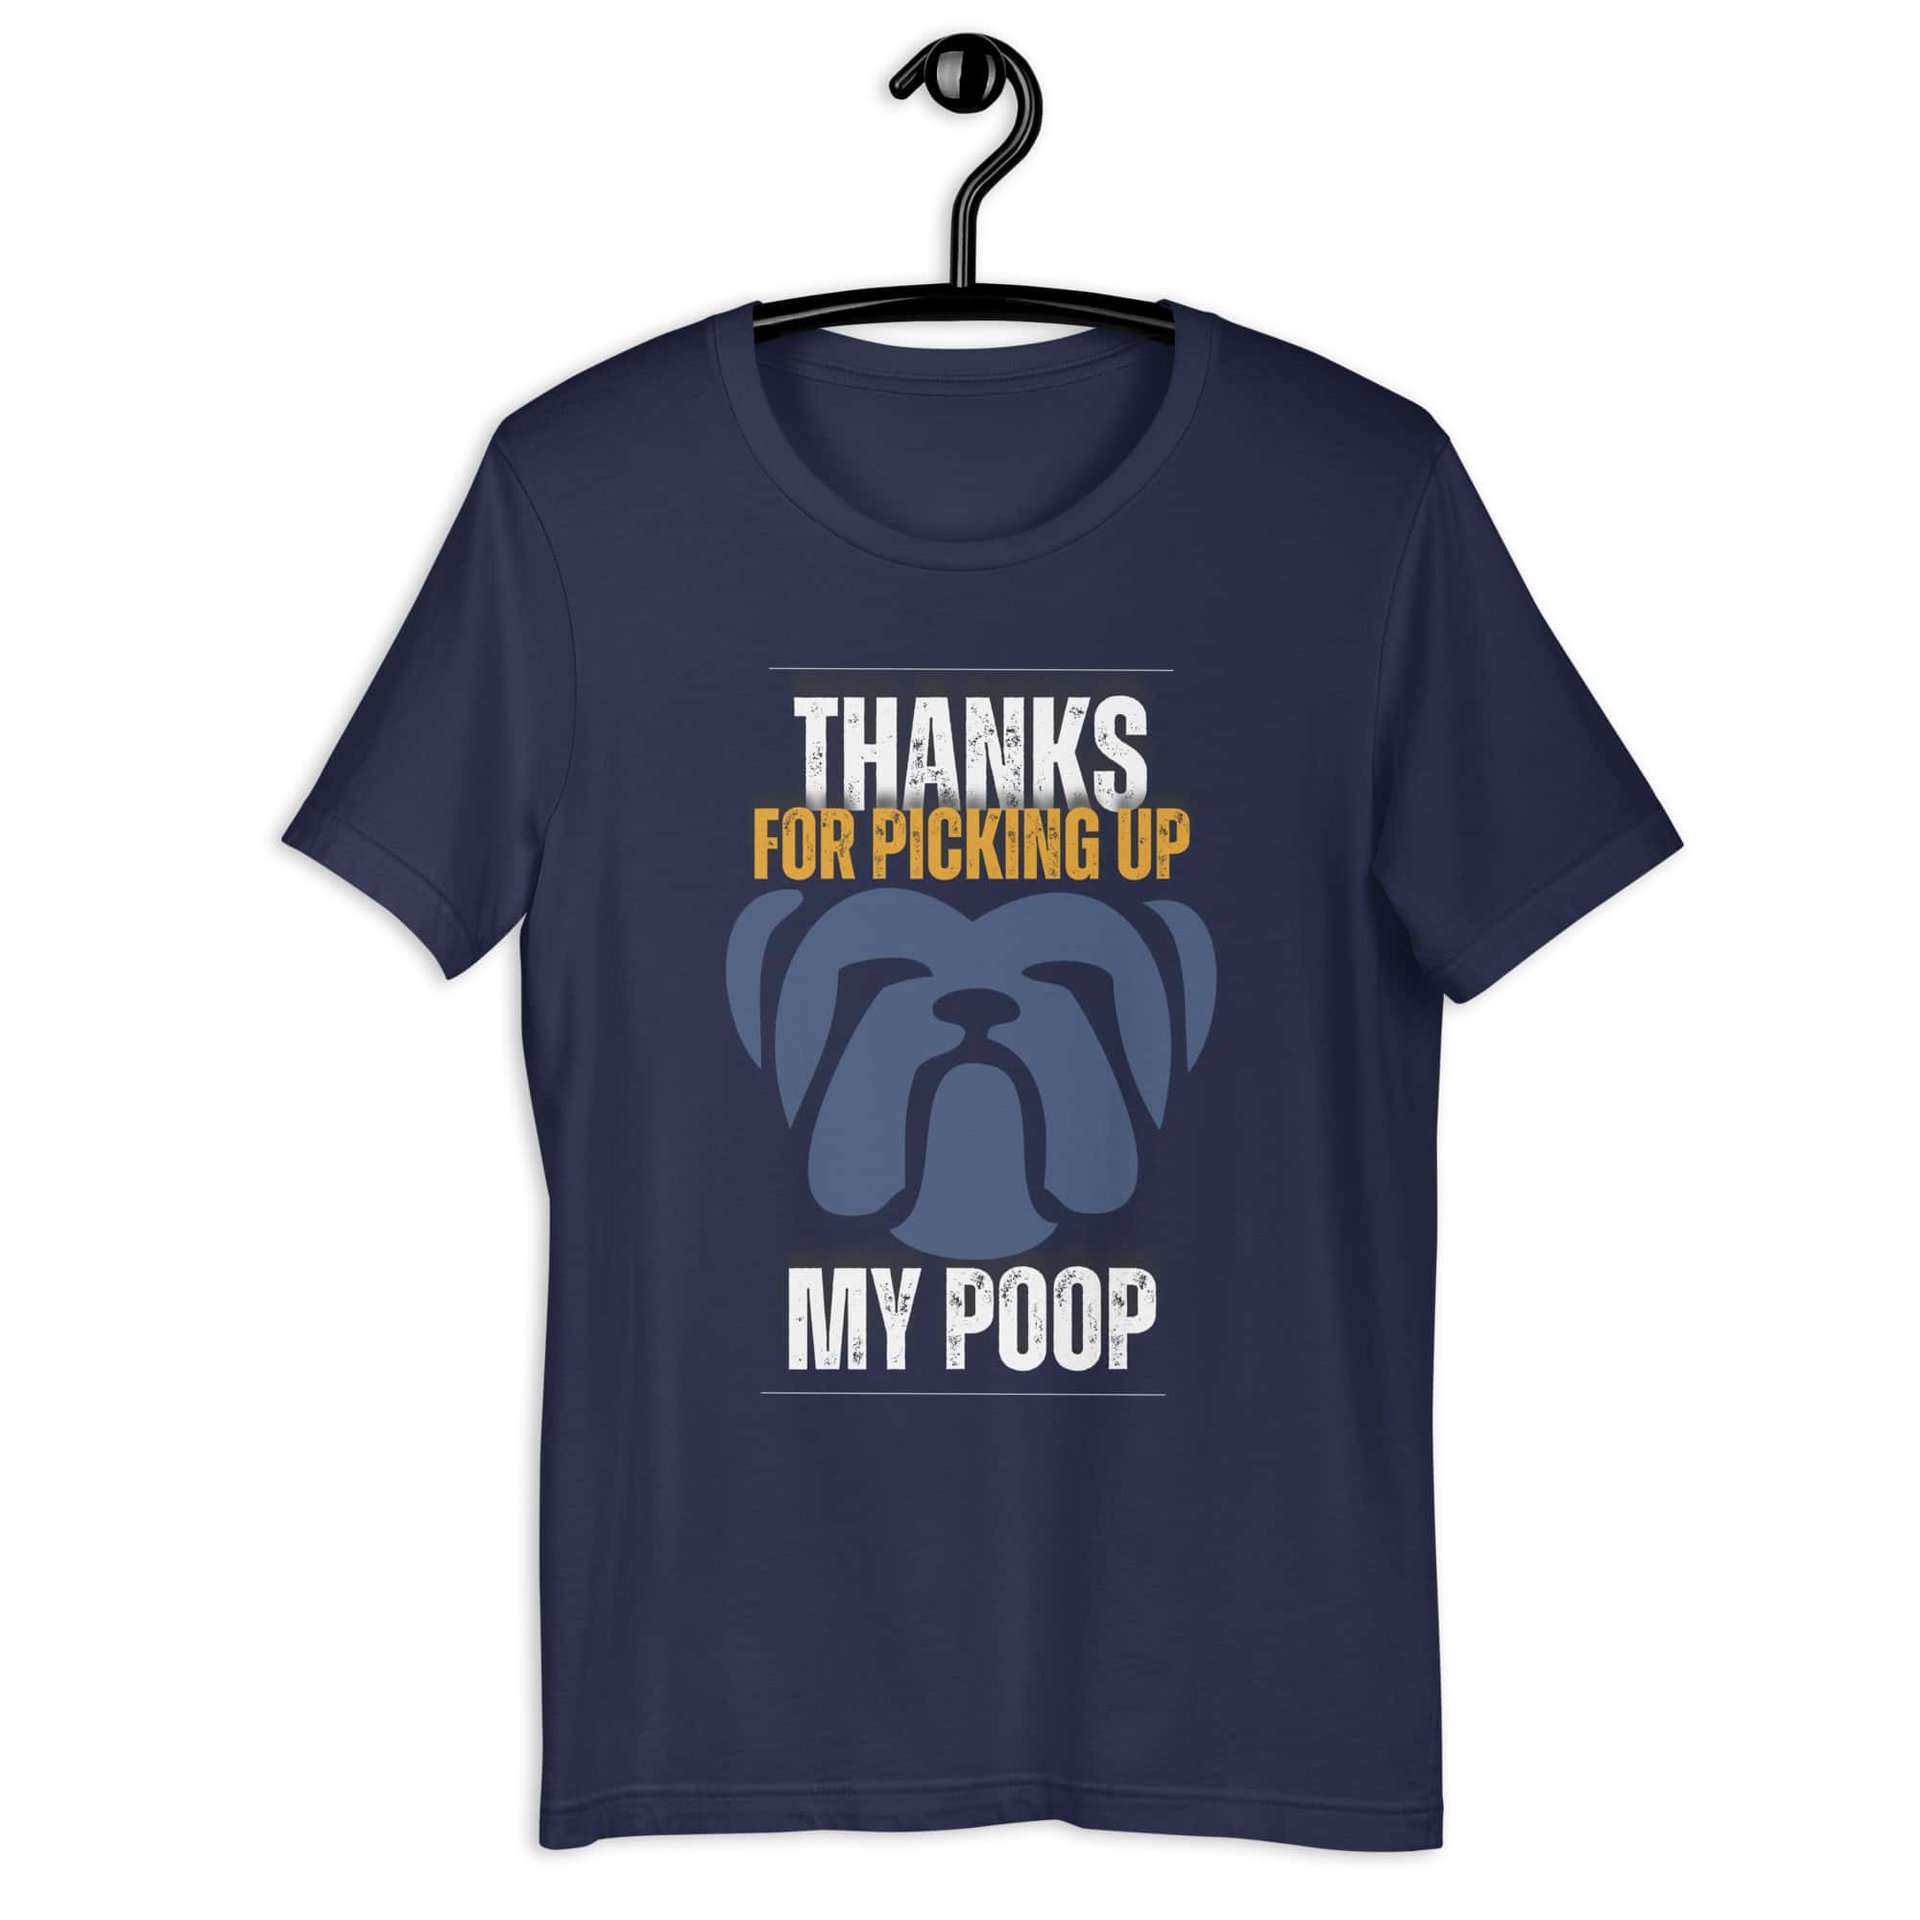 Thanks For Picking Up My POOP Funny Bulldog Unisex T-Shirt. Navy